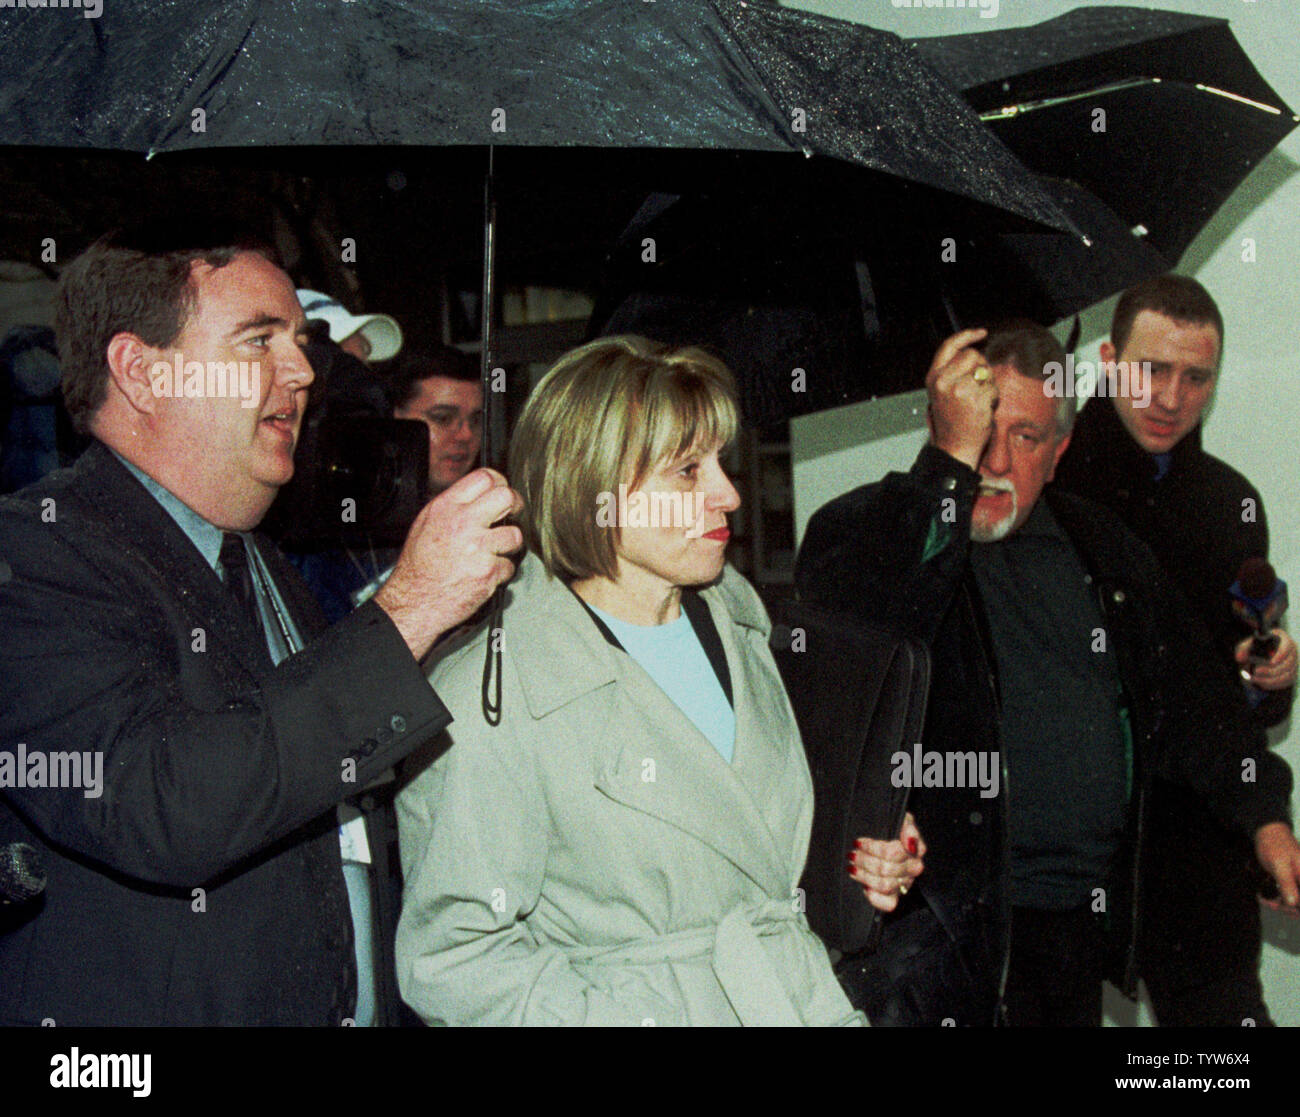 Sharon Rocha, center, leaves the San Mateo County Courthouse in Redwood City, Calif., on February 2, 2004, after a hearing for her son-in-law Scott Peterson, who is accused of murdering her daughter Laci Peterson and their unborn son. Accompanying her is her husband, Ron Grantski, second from right. (UPI Photo/David Yee) Stock Photo